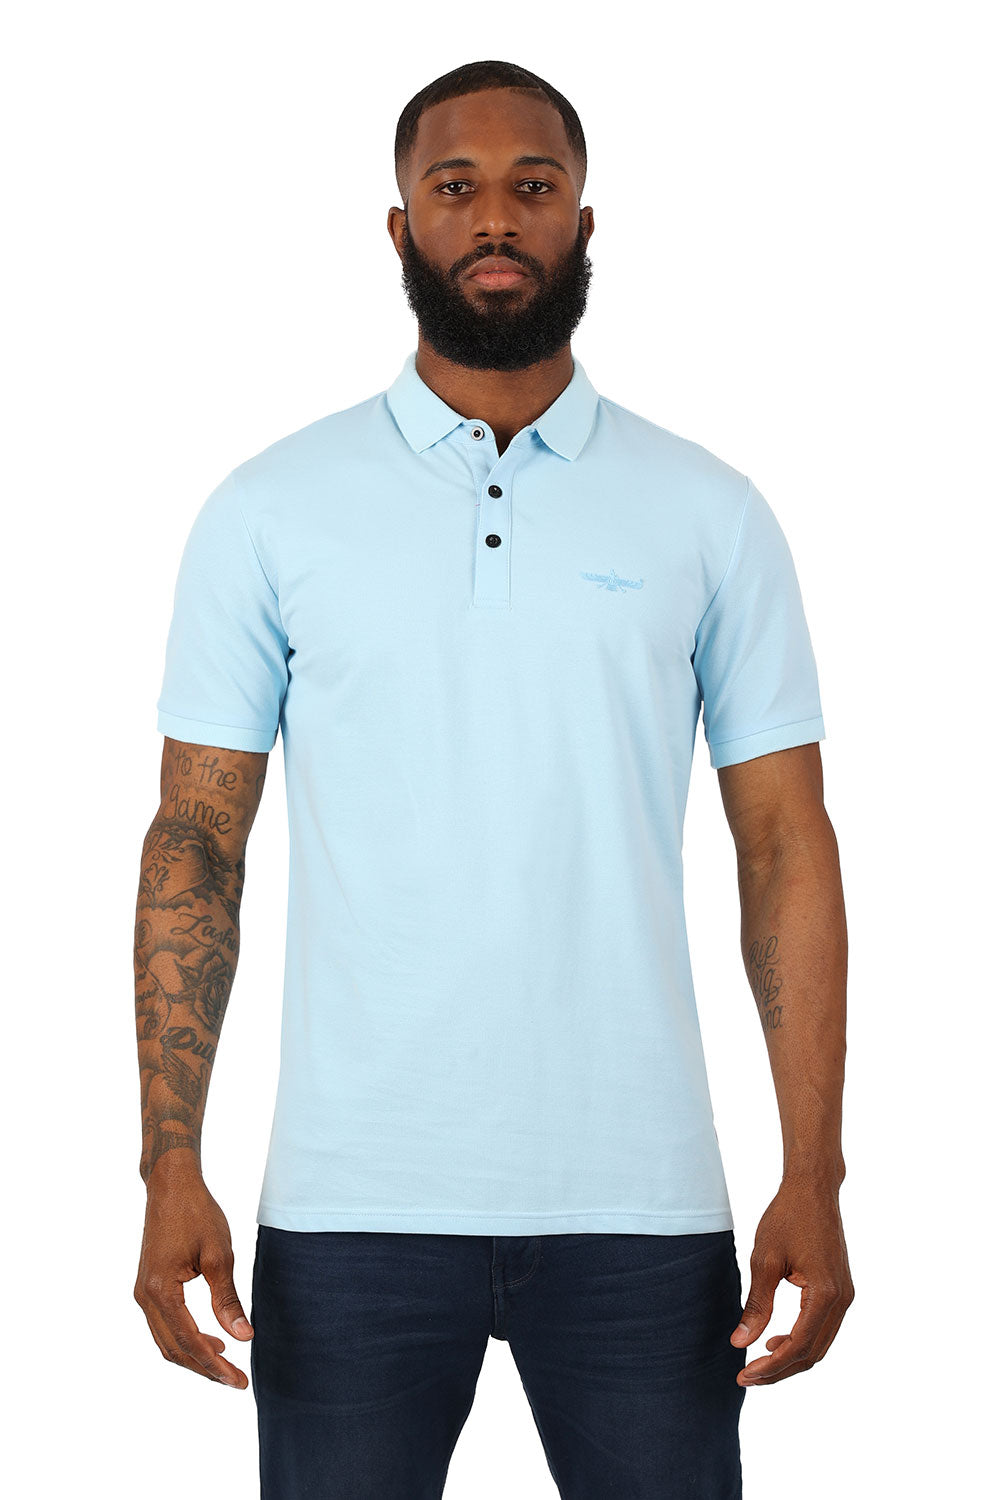 Barabas men's Solid Color With Logo Polo Shirts 3PP833 Sky